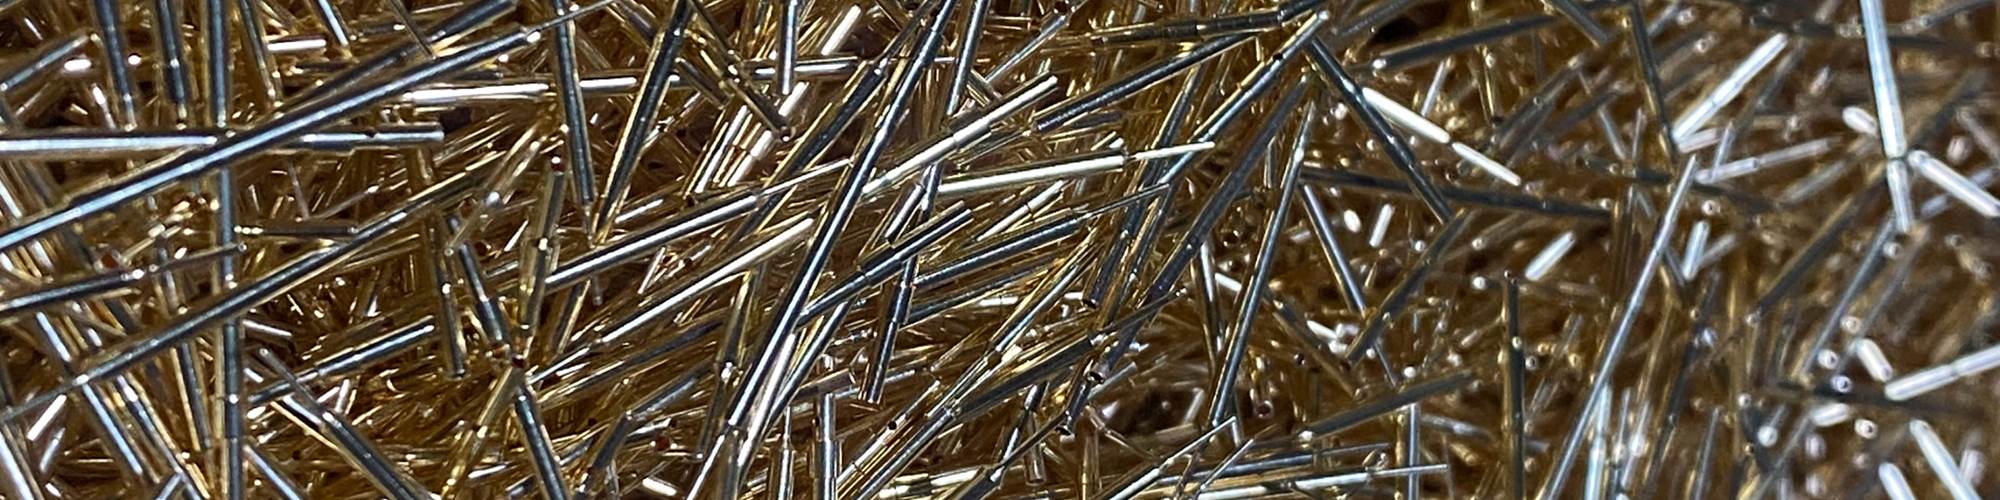 Selective plated pins at Electro-Spec